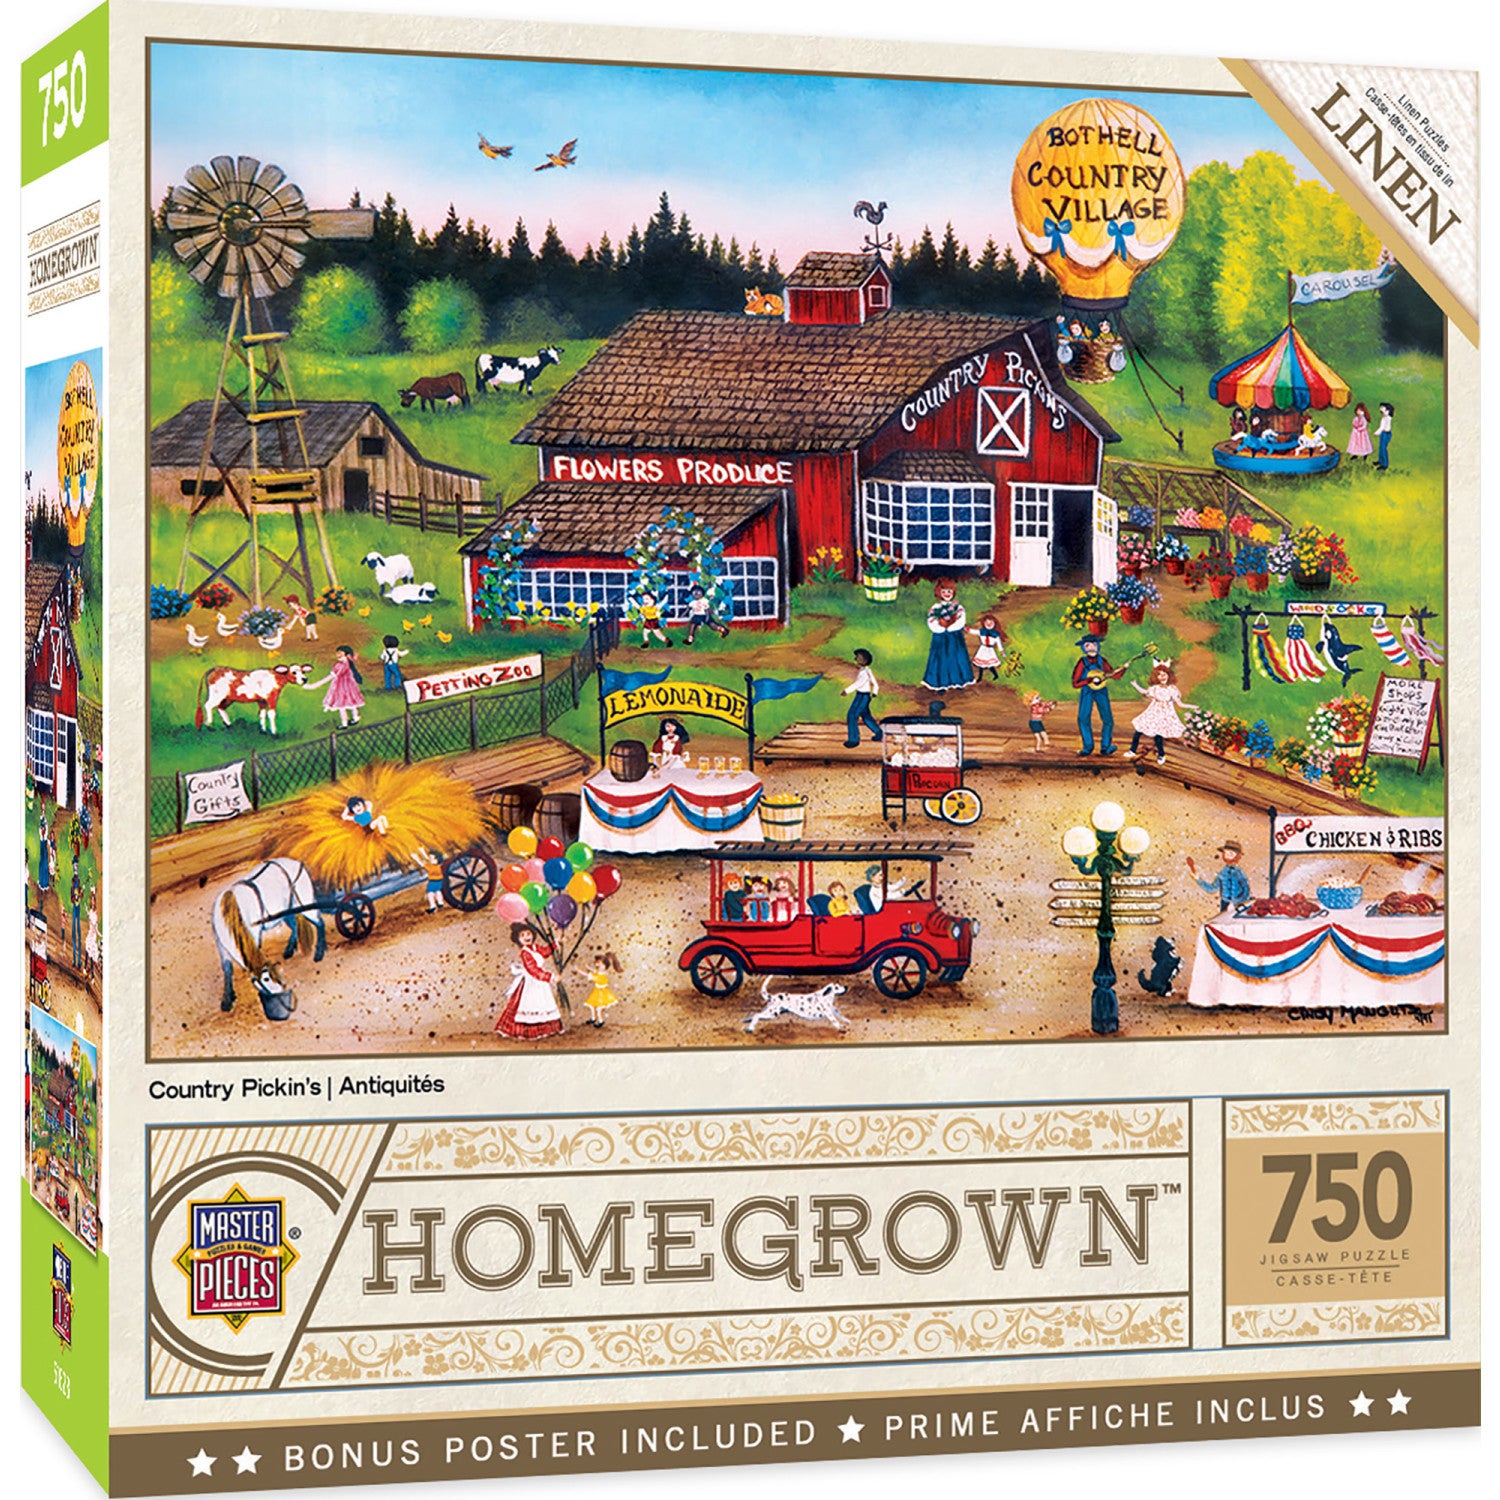 Homegrown - Country Pickin's 750 Piece Jigsaw Puzzle